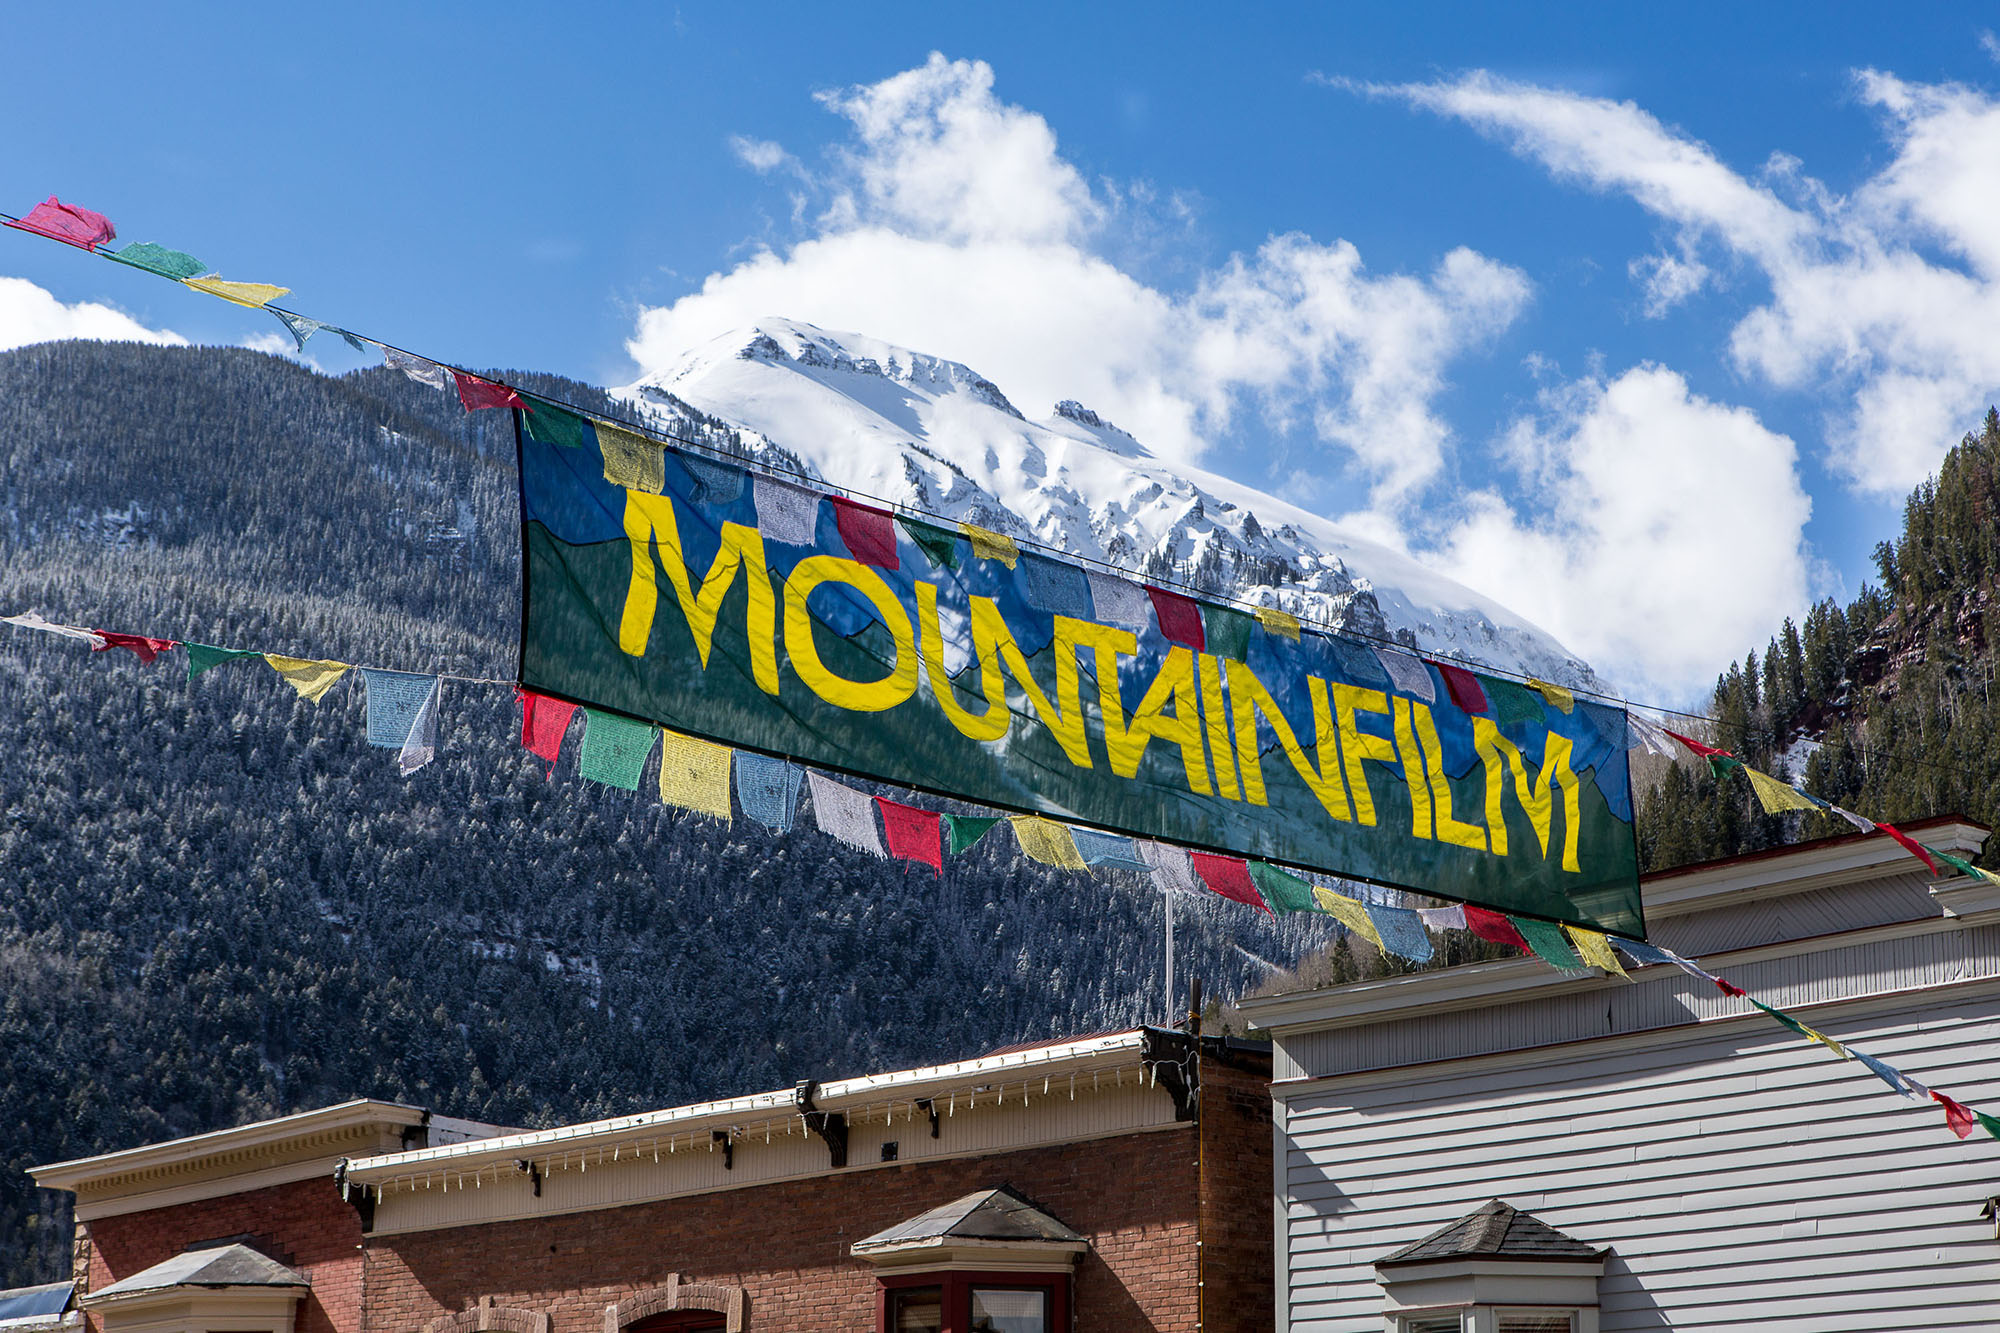 Mountainfilm: One of Telluride’s Most Sustainable Festivals